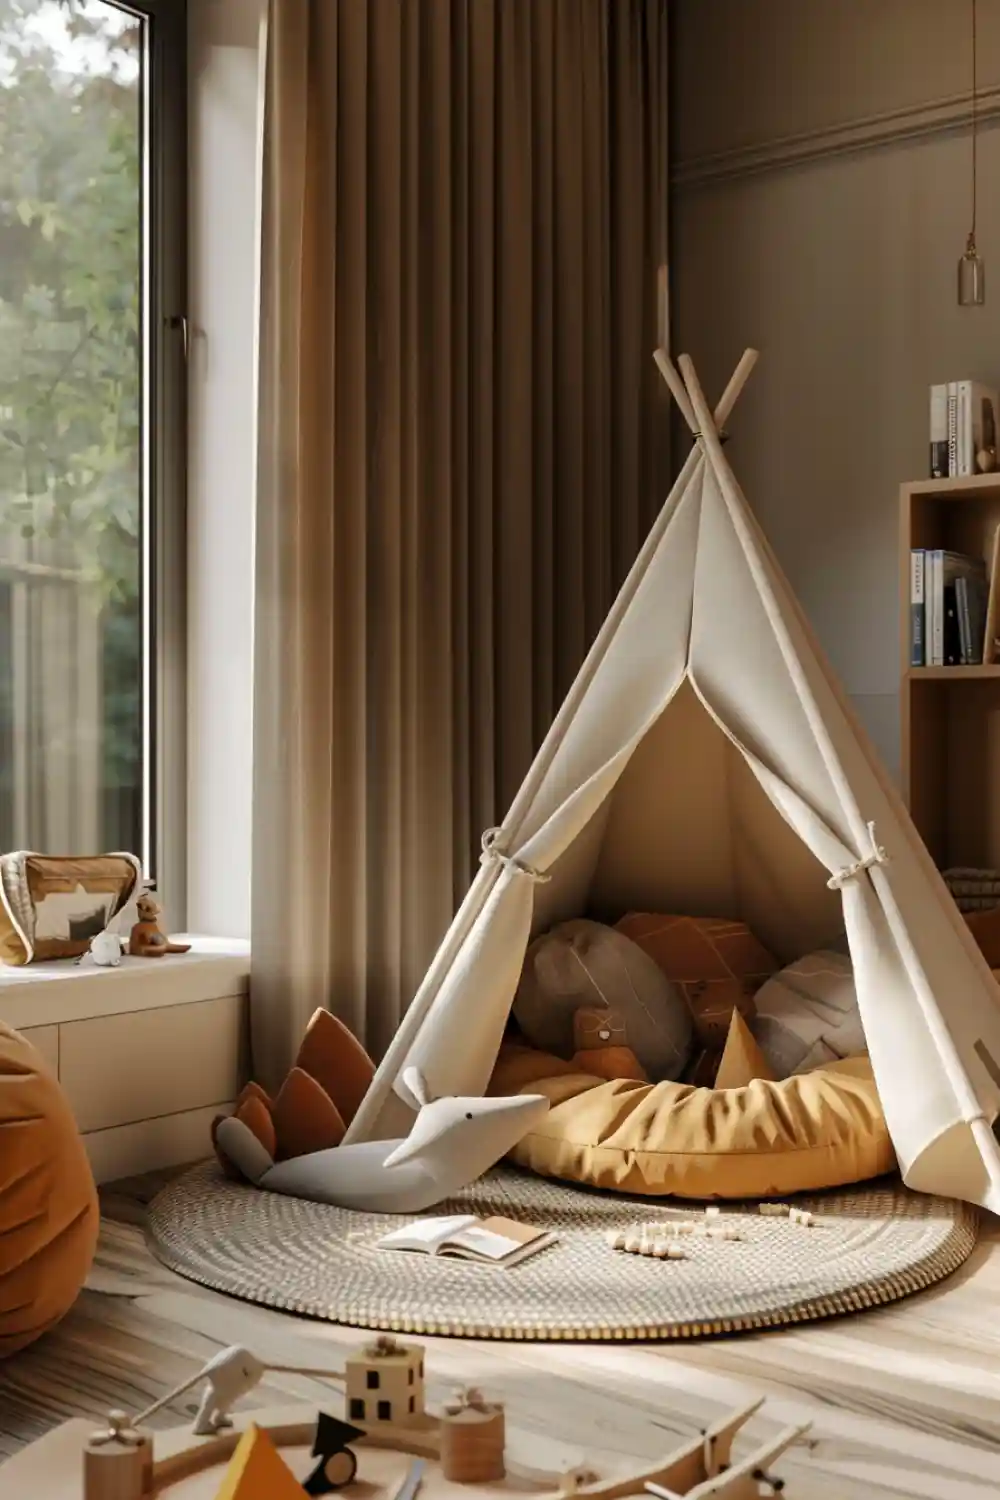 Play Tents or Teepees 3